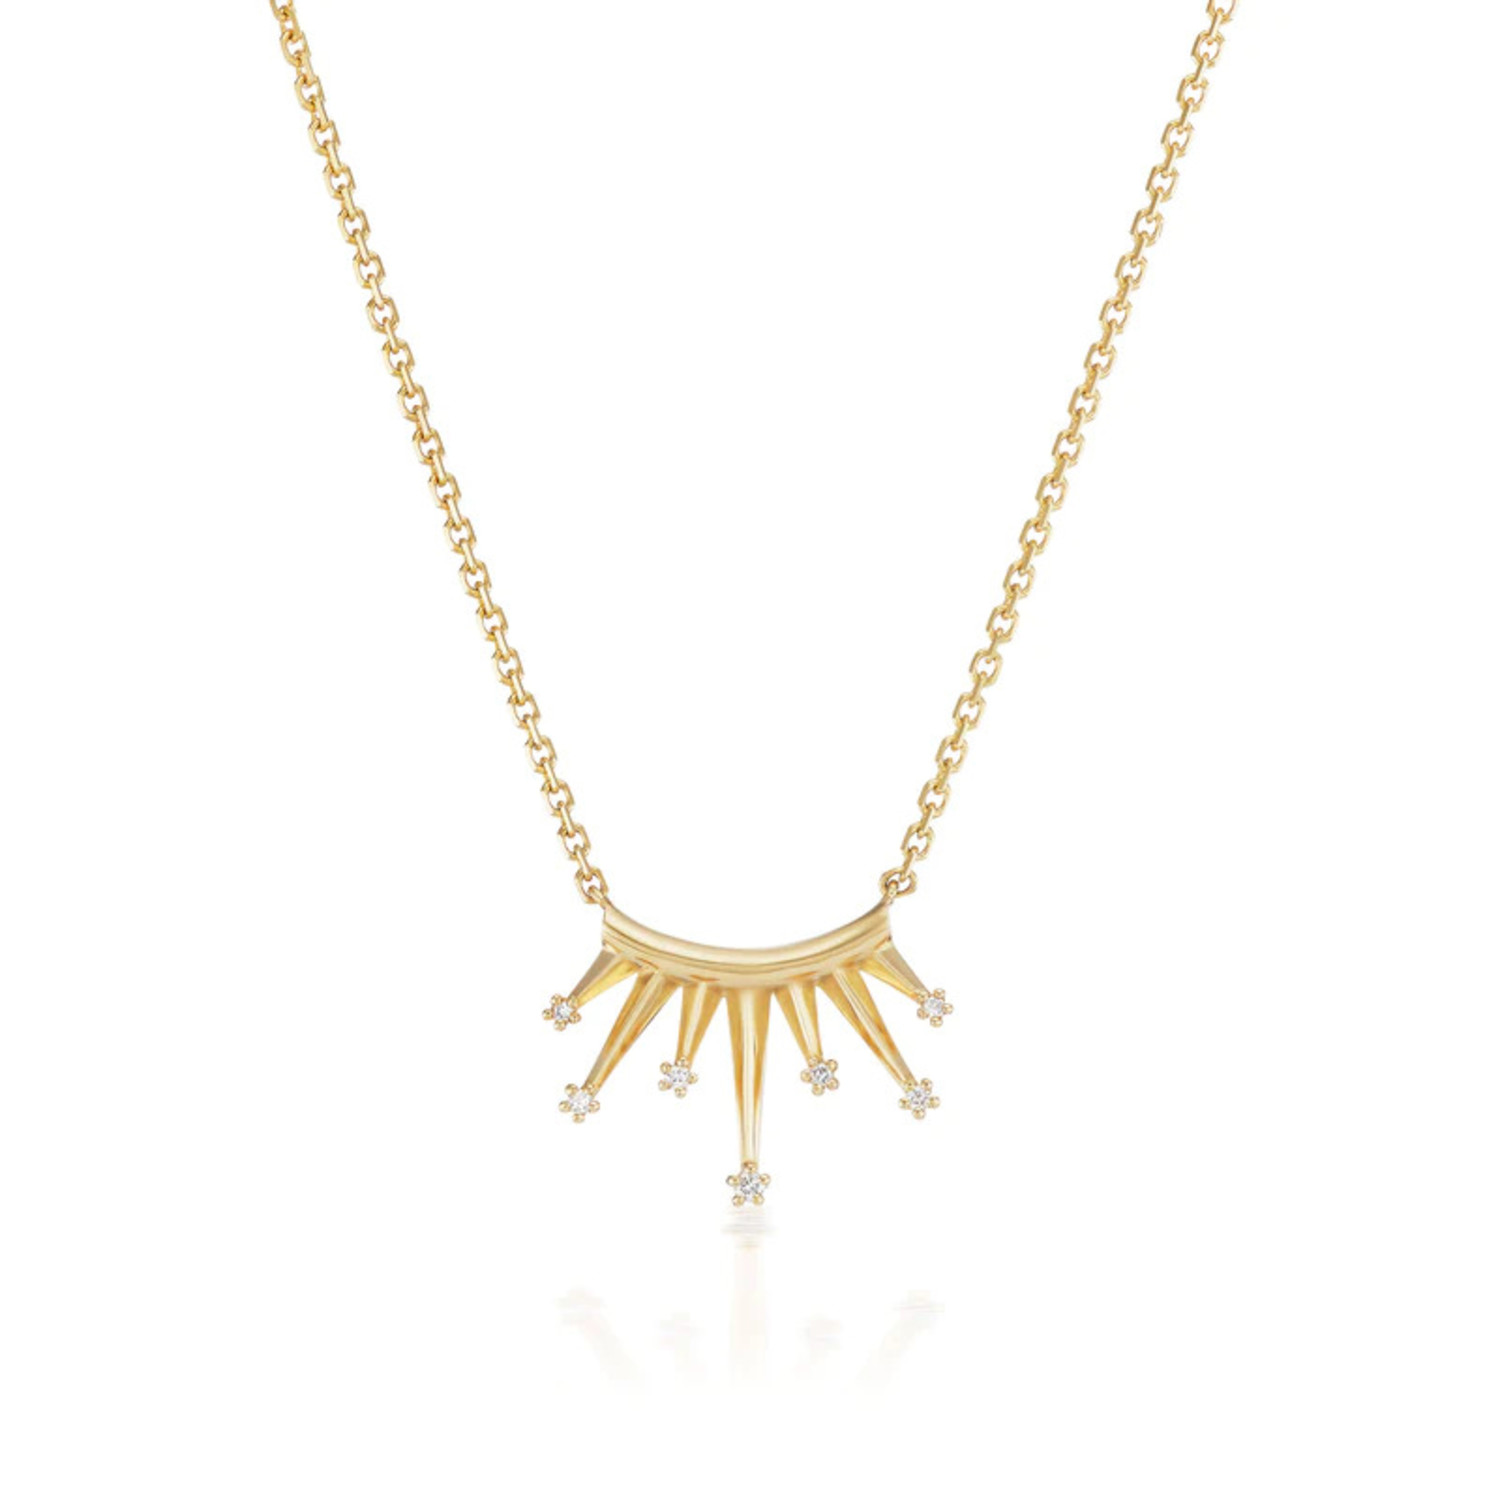 Mini Starburst Necklace in 18K Yellow Gold